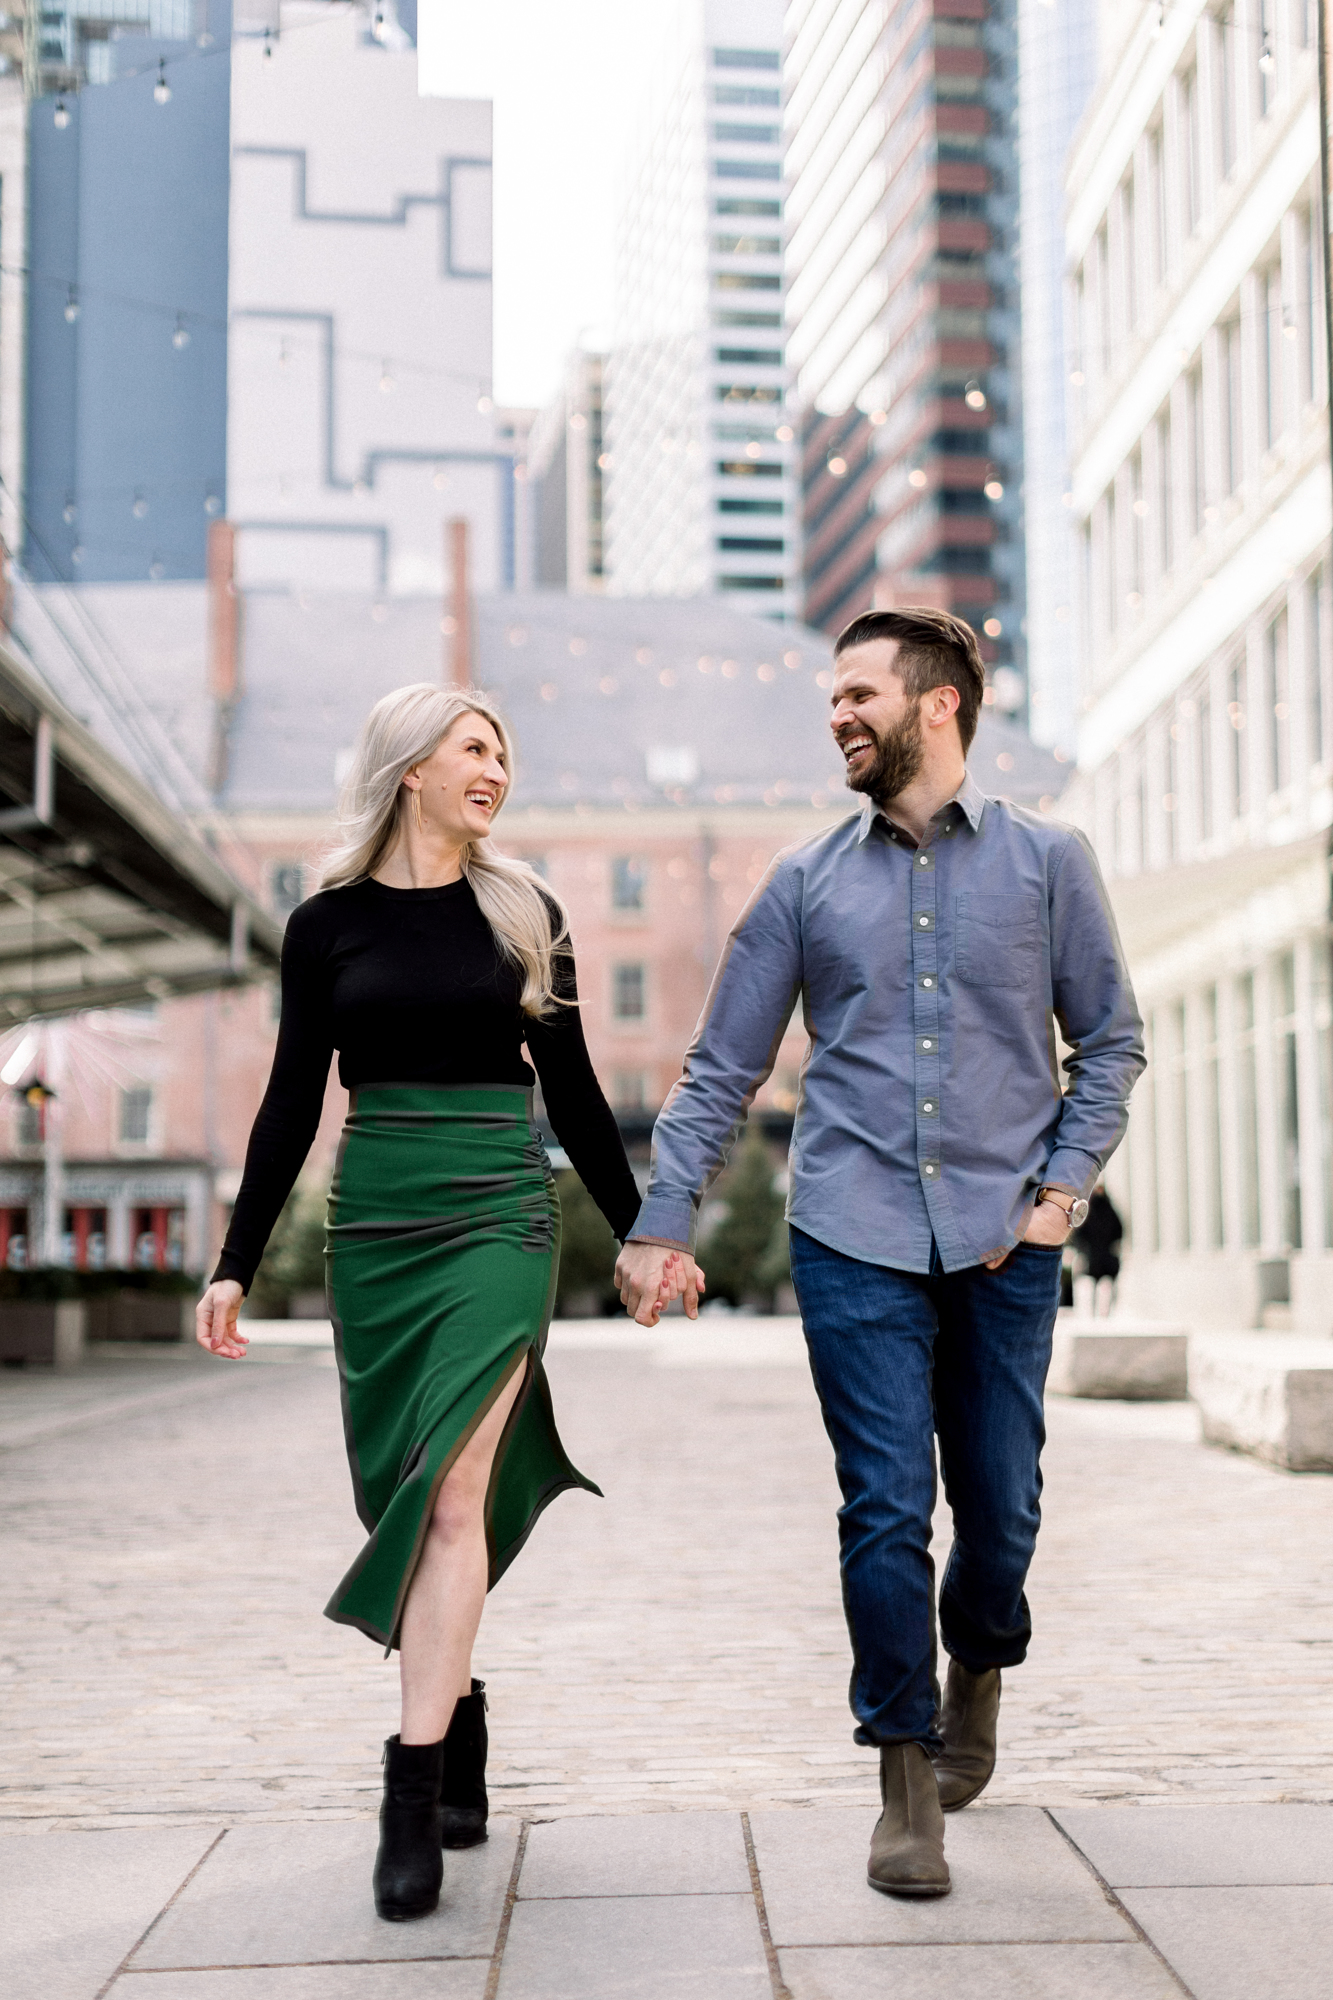 Candid South Street Seaport Engagement Photos